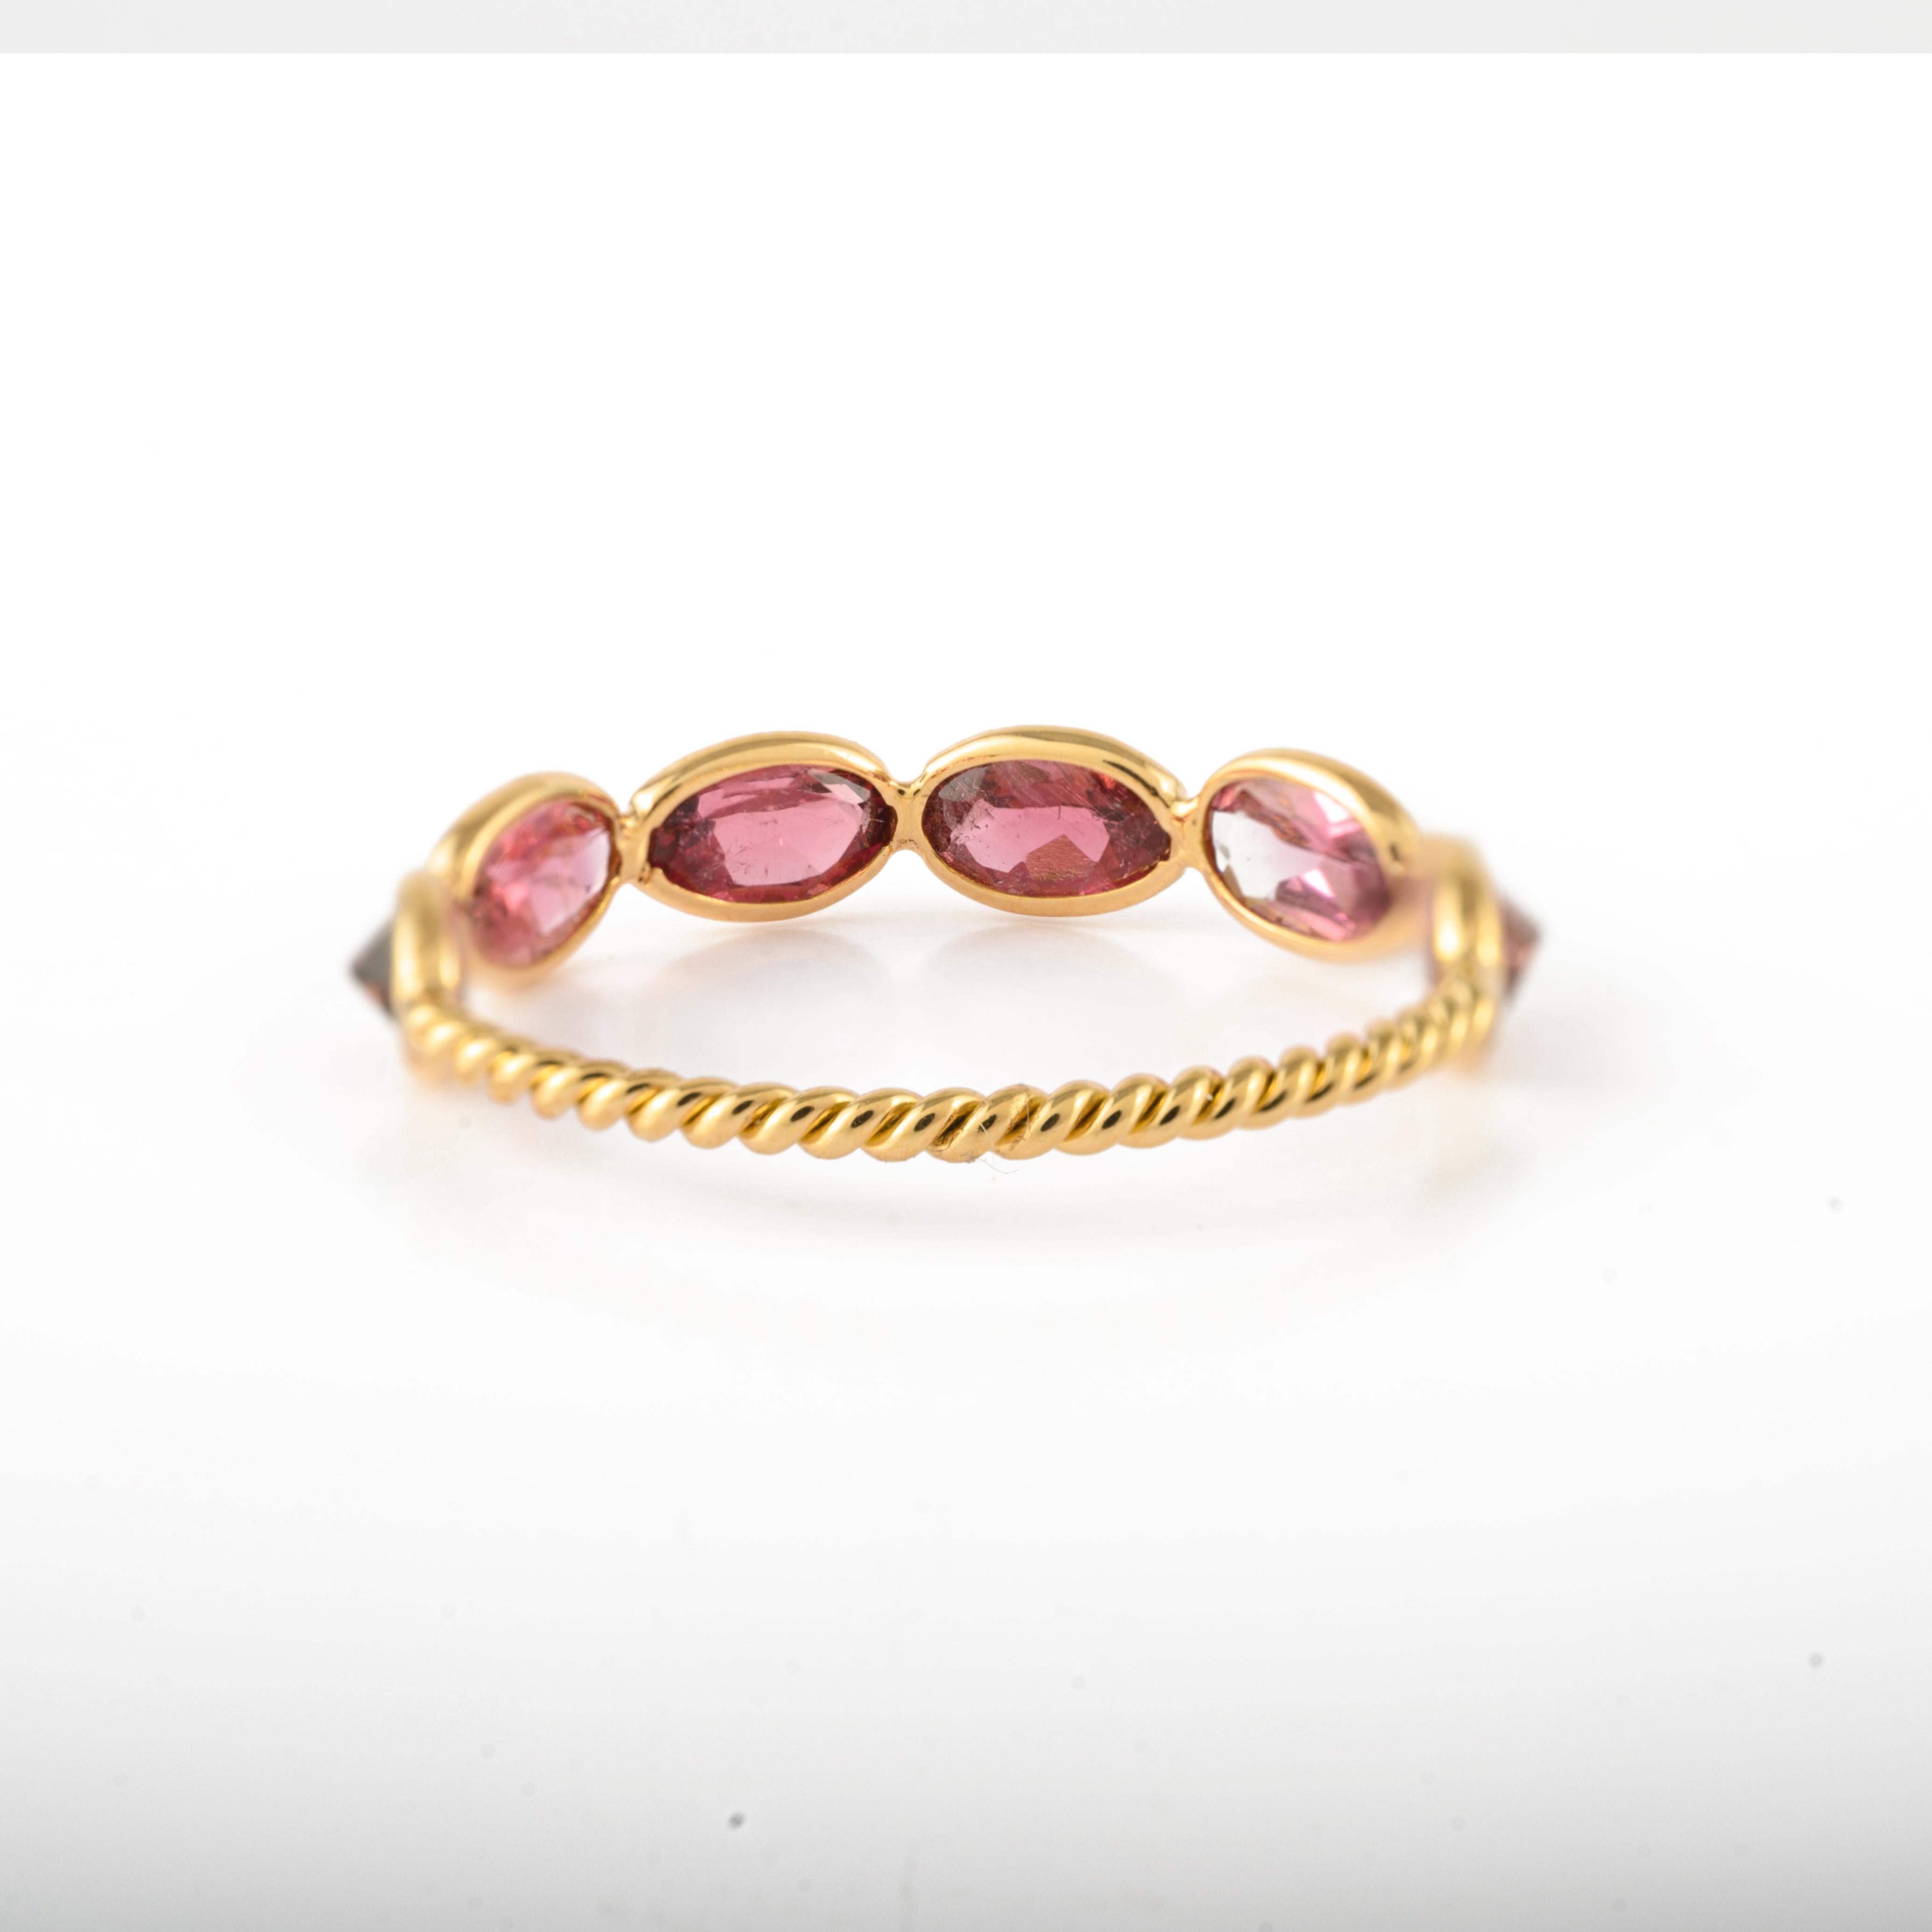 For Sale:  Minimalist Pink Tourmaline Half Eternity Band Ring in 18k Yellow Gold 9